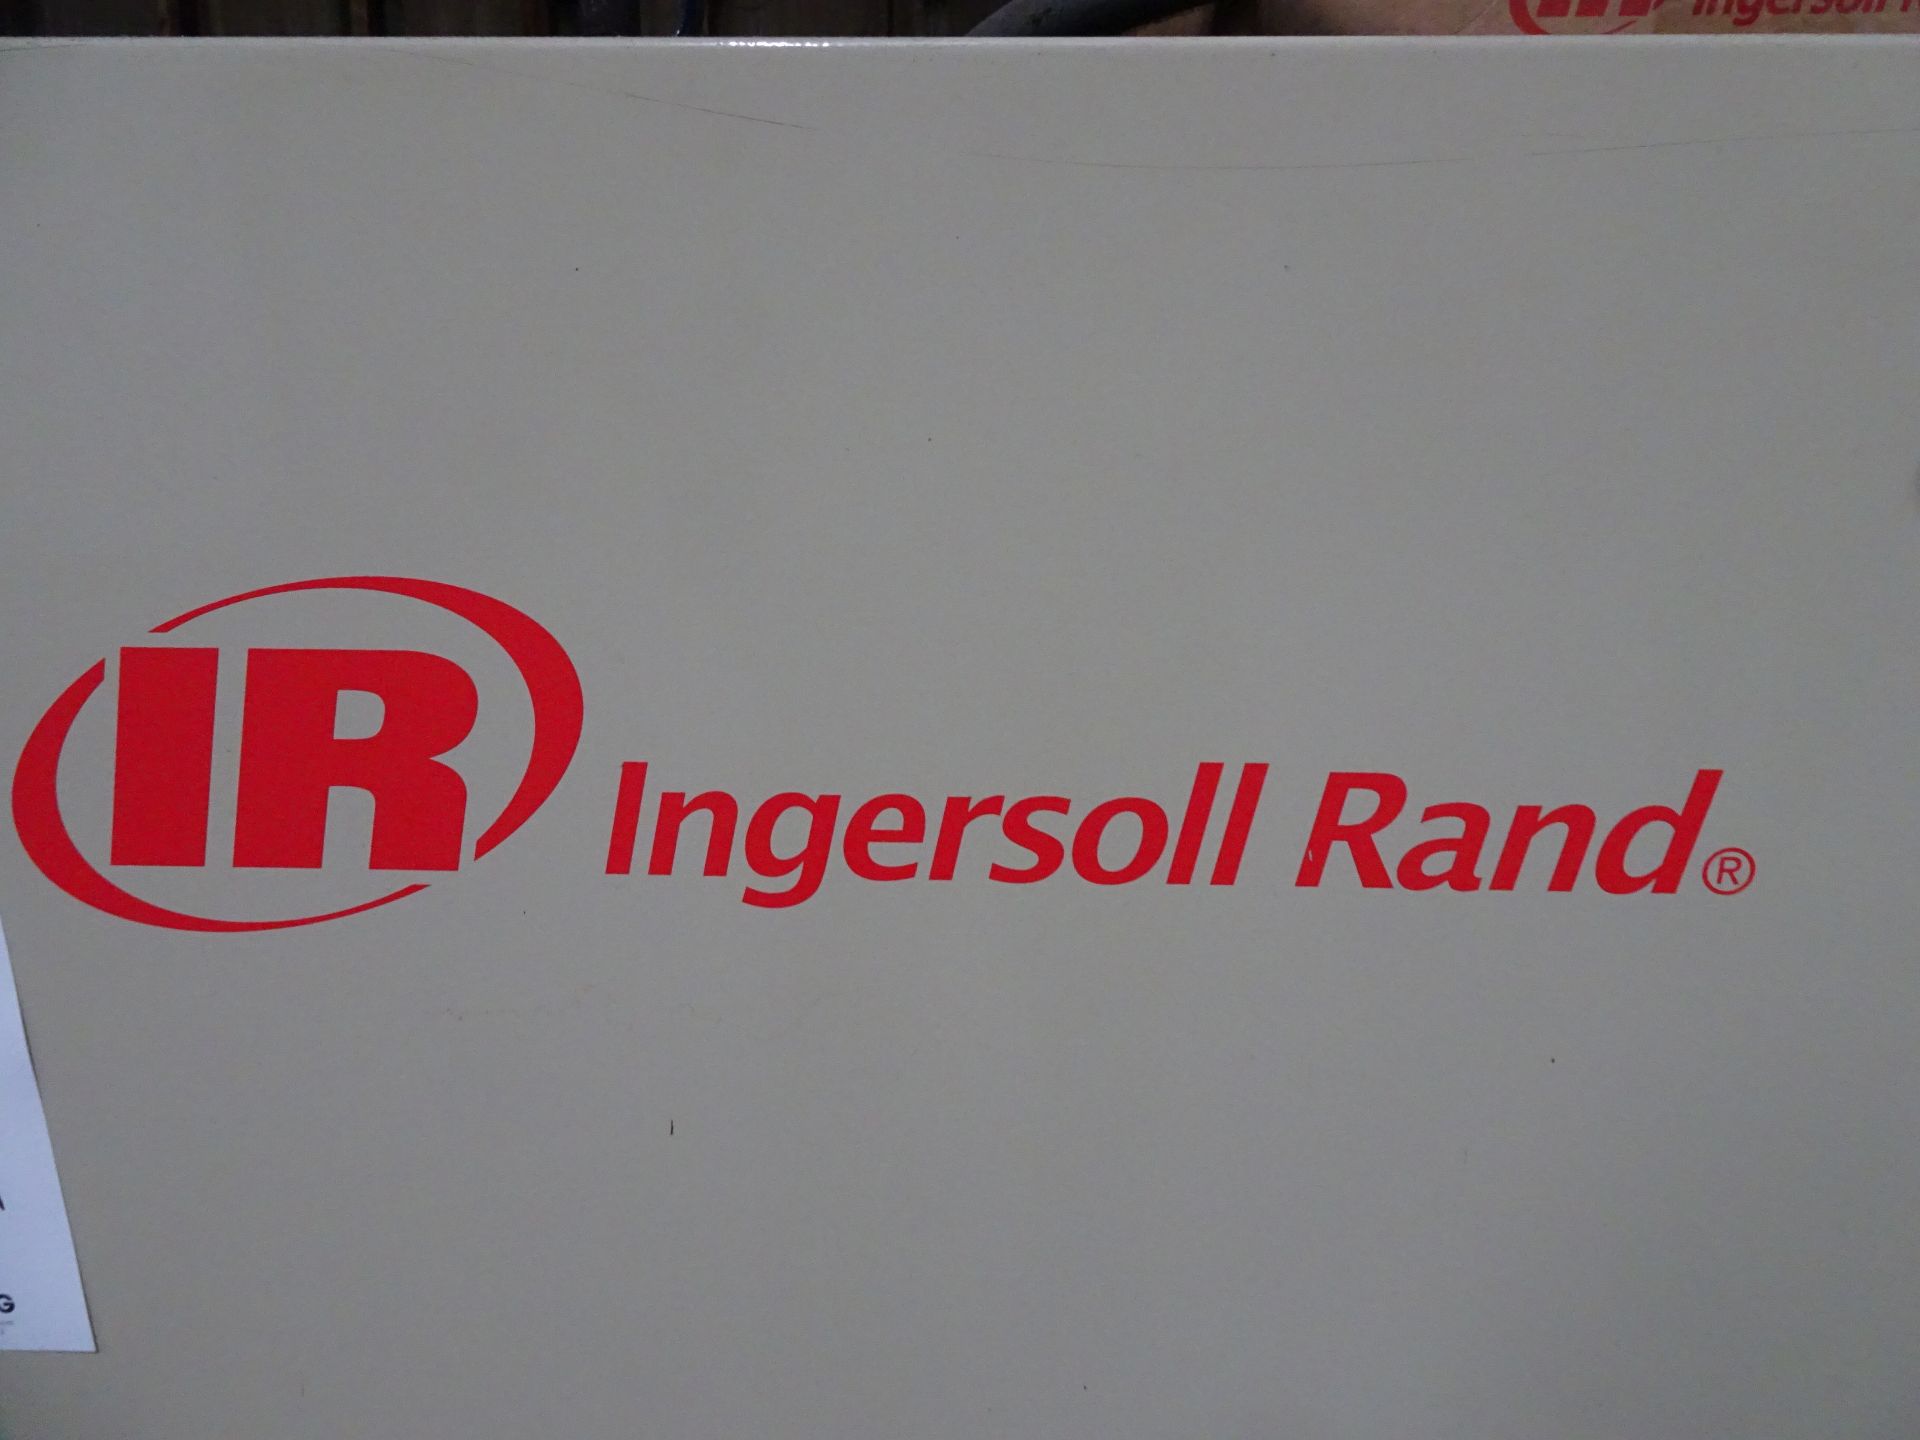 Ingersoll Rand Model RS18i-A125 25 HP Rotary Screw Air Compressor - Image 2 of 4